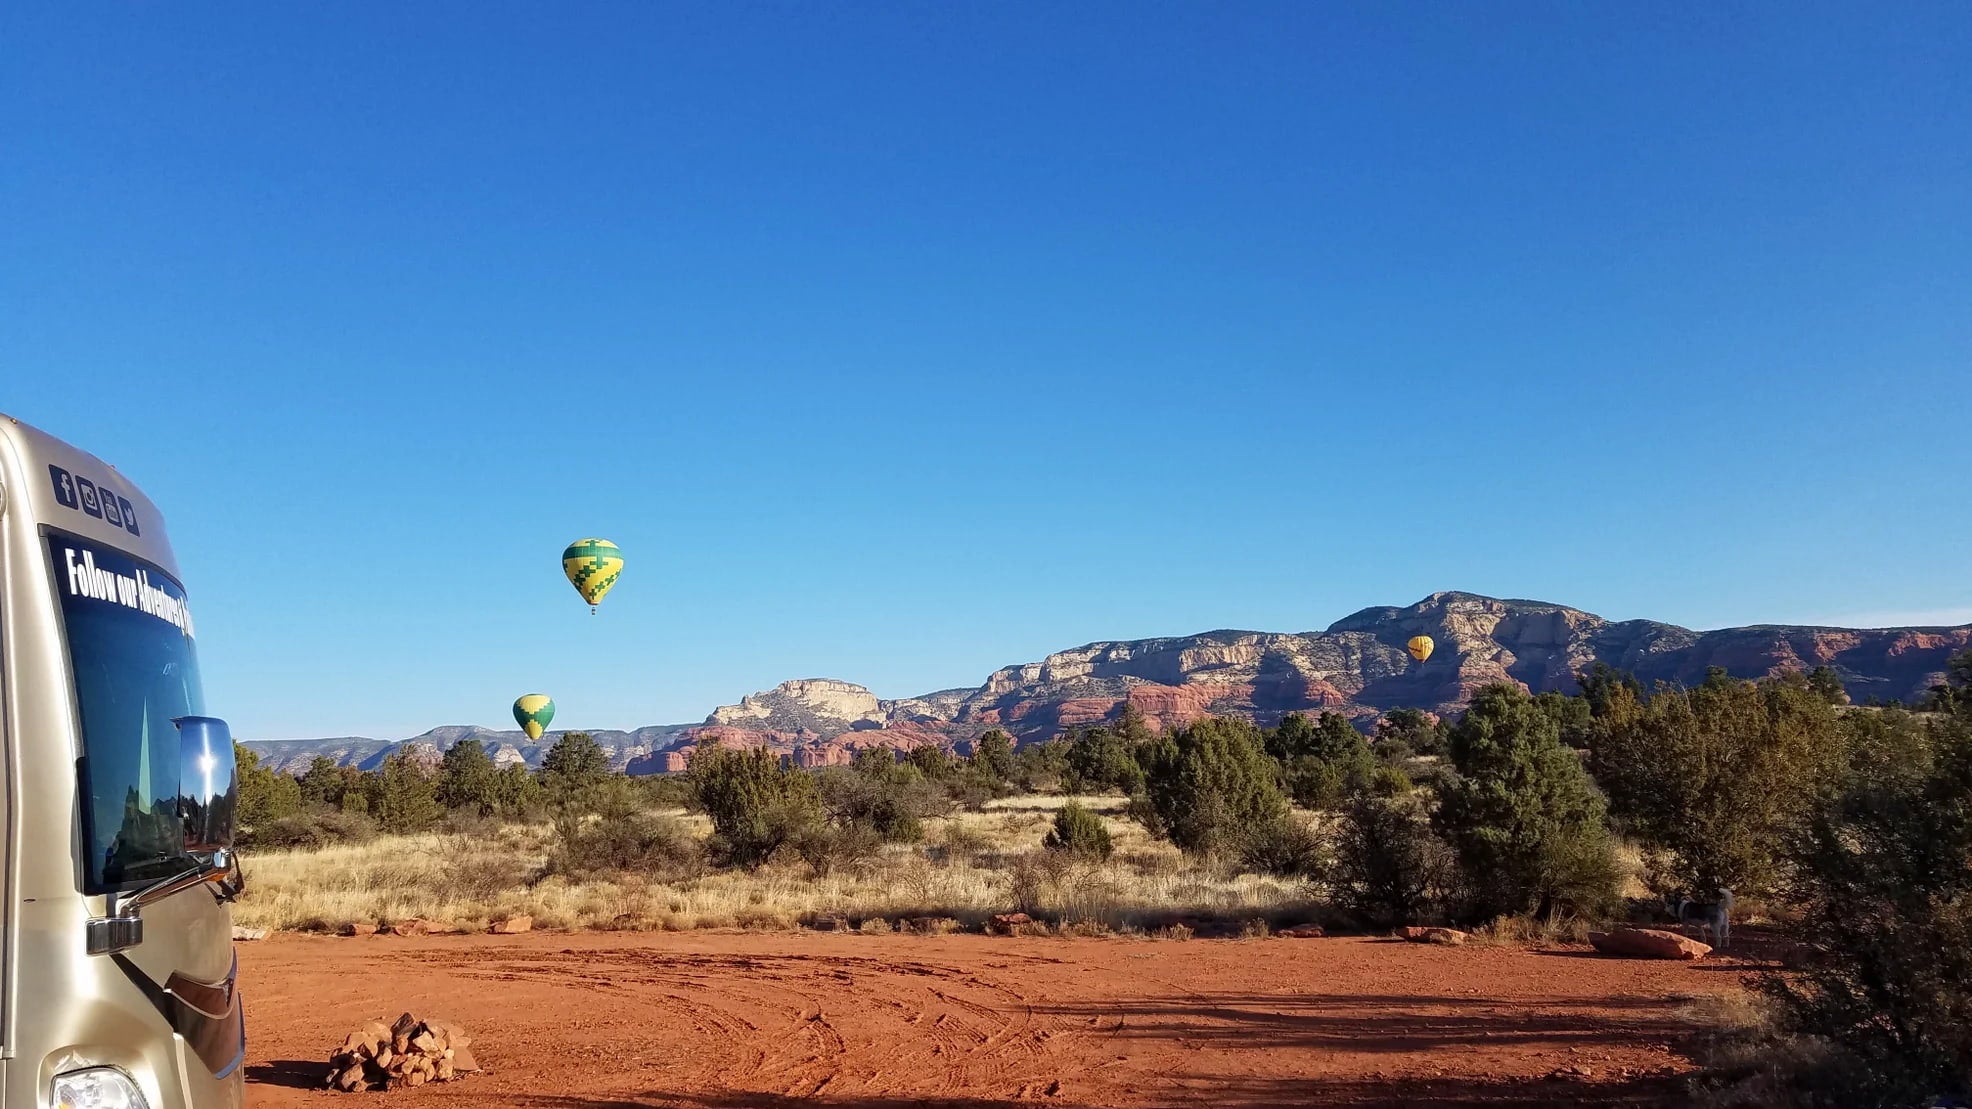 Hot air baloons rising above the desert above rocky mountains in the distance with an RV parked at a desert campsite in the foreground.